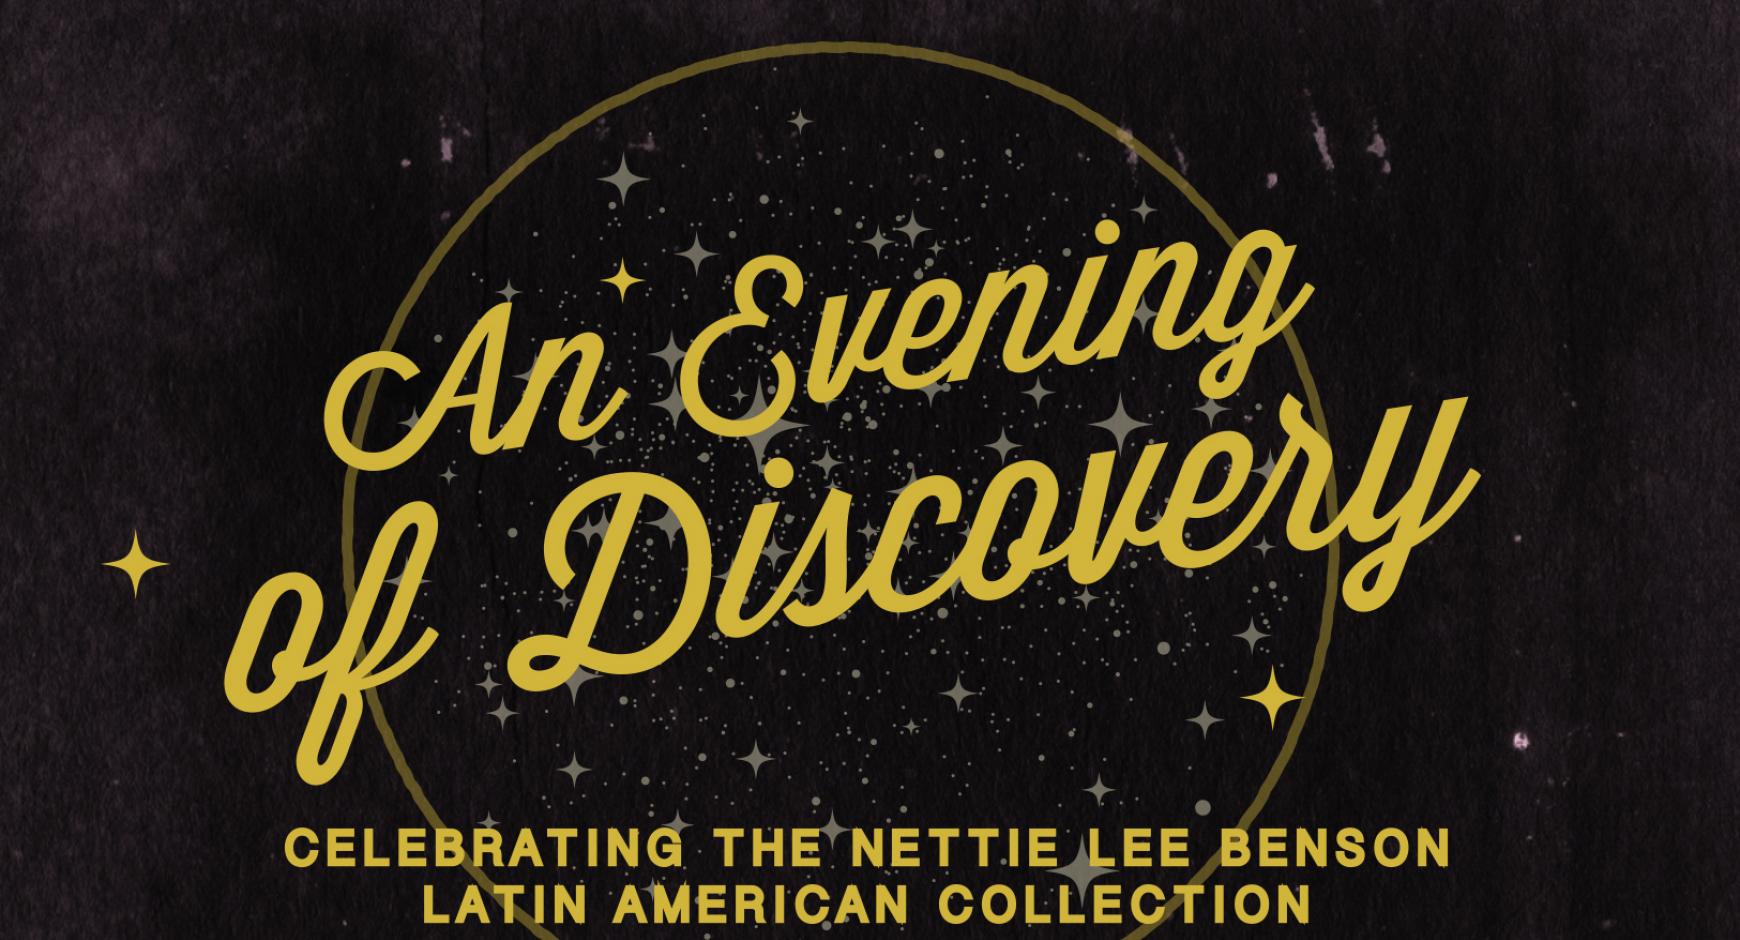 Image is a black graphic with gold color sparkles and gold color script.  Script reads "An Evening of Discovery: Celebrating the Nettie Lee Benson Latin American Collection"